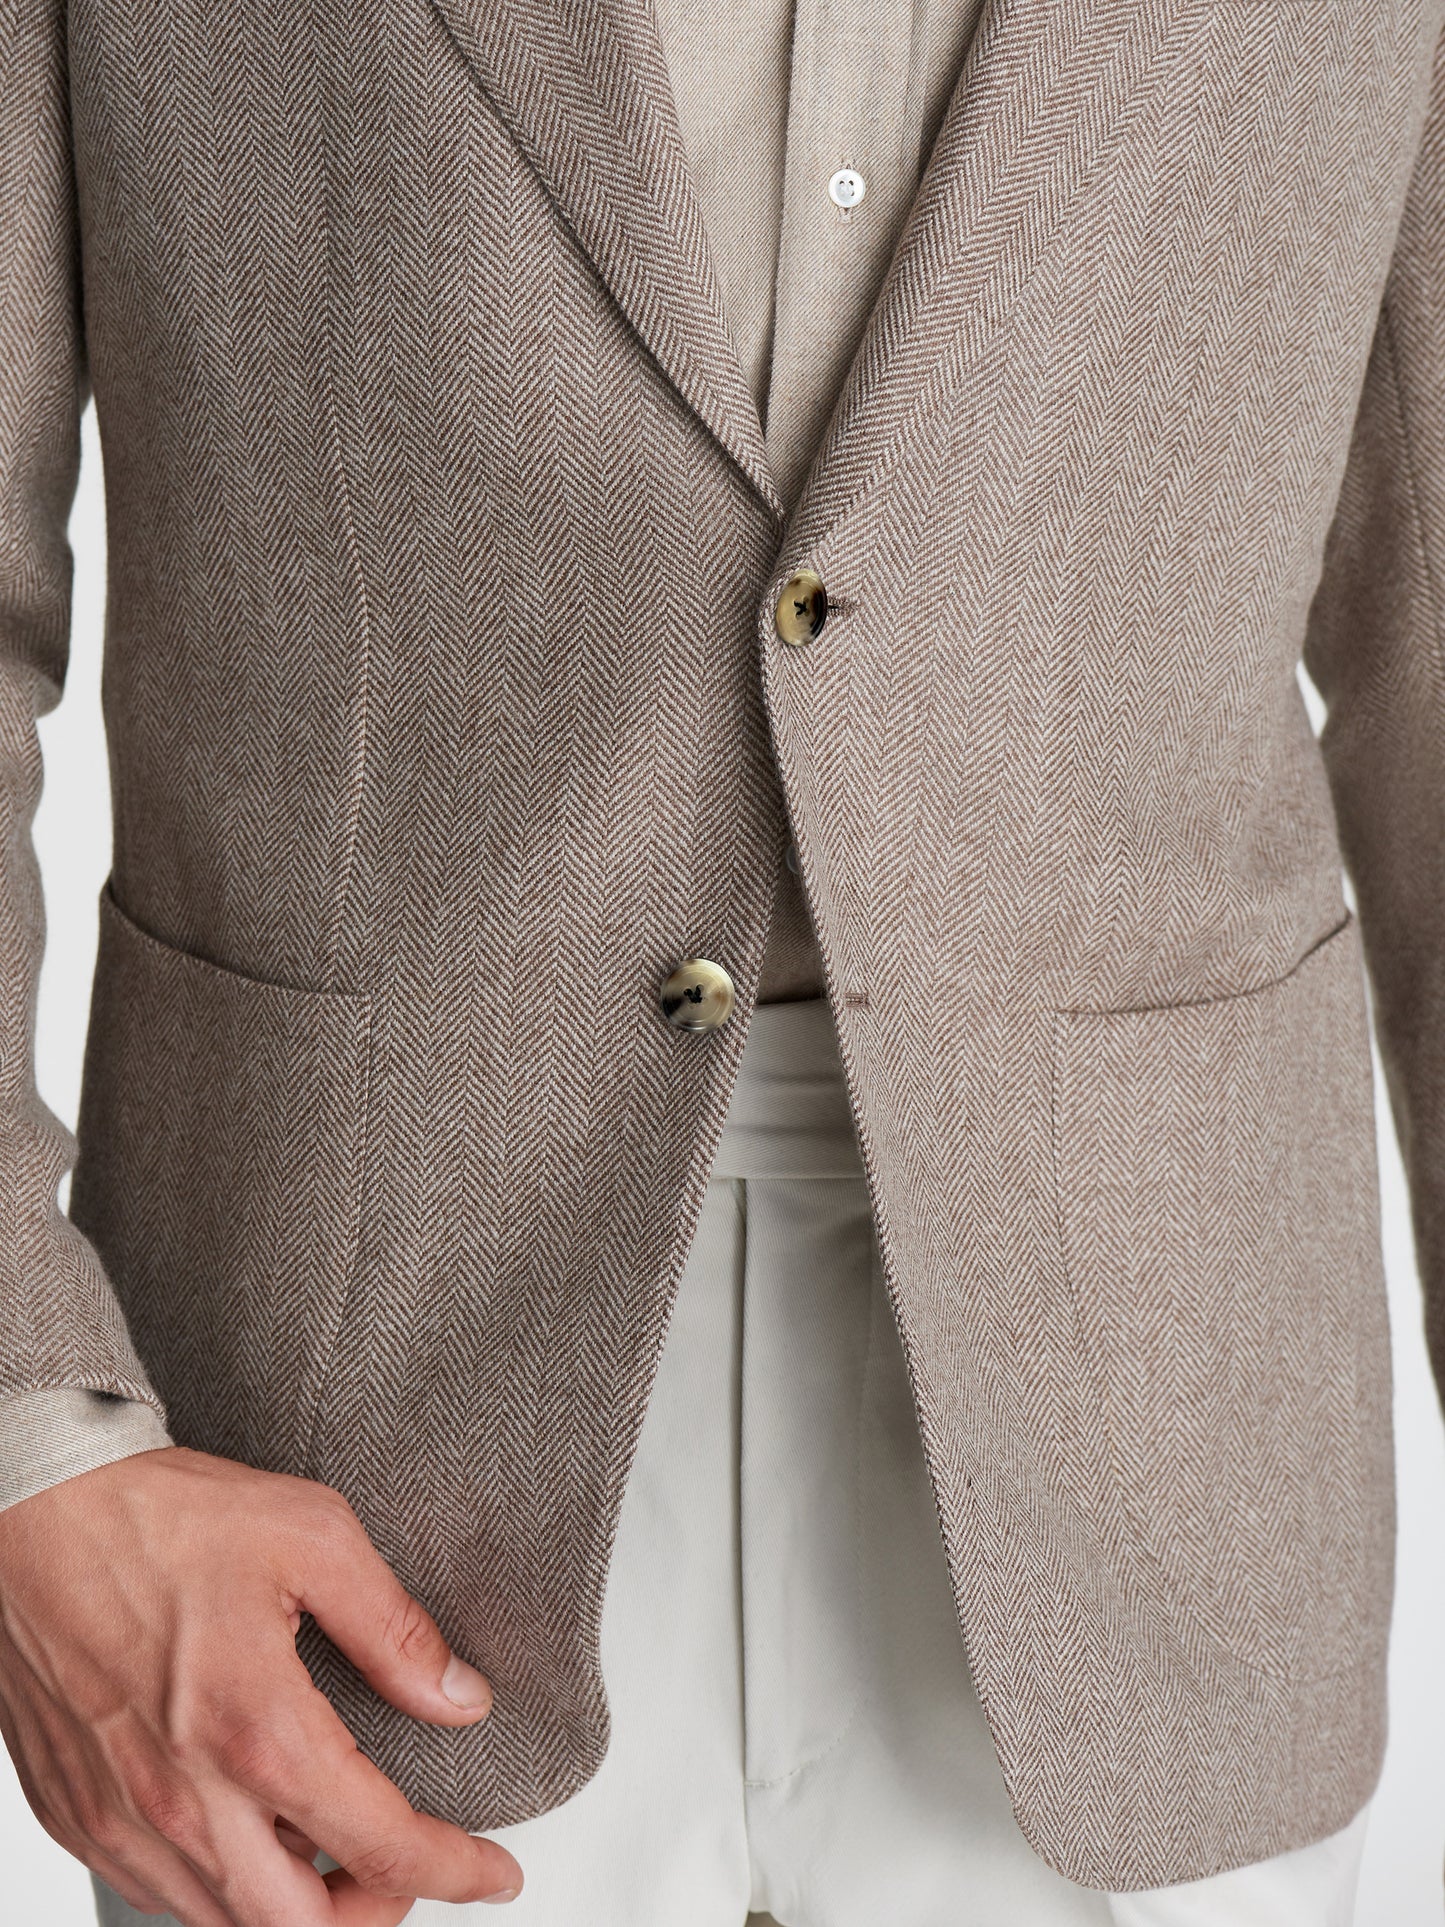 Cashmere Unstructured Single Breasted Jacket Brown Twill Detail Model Image